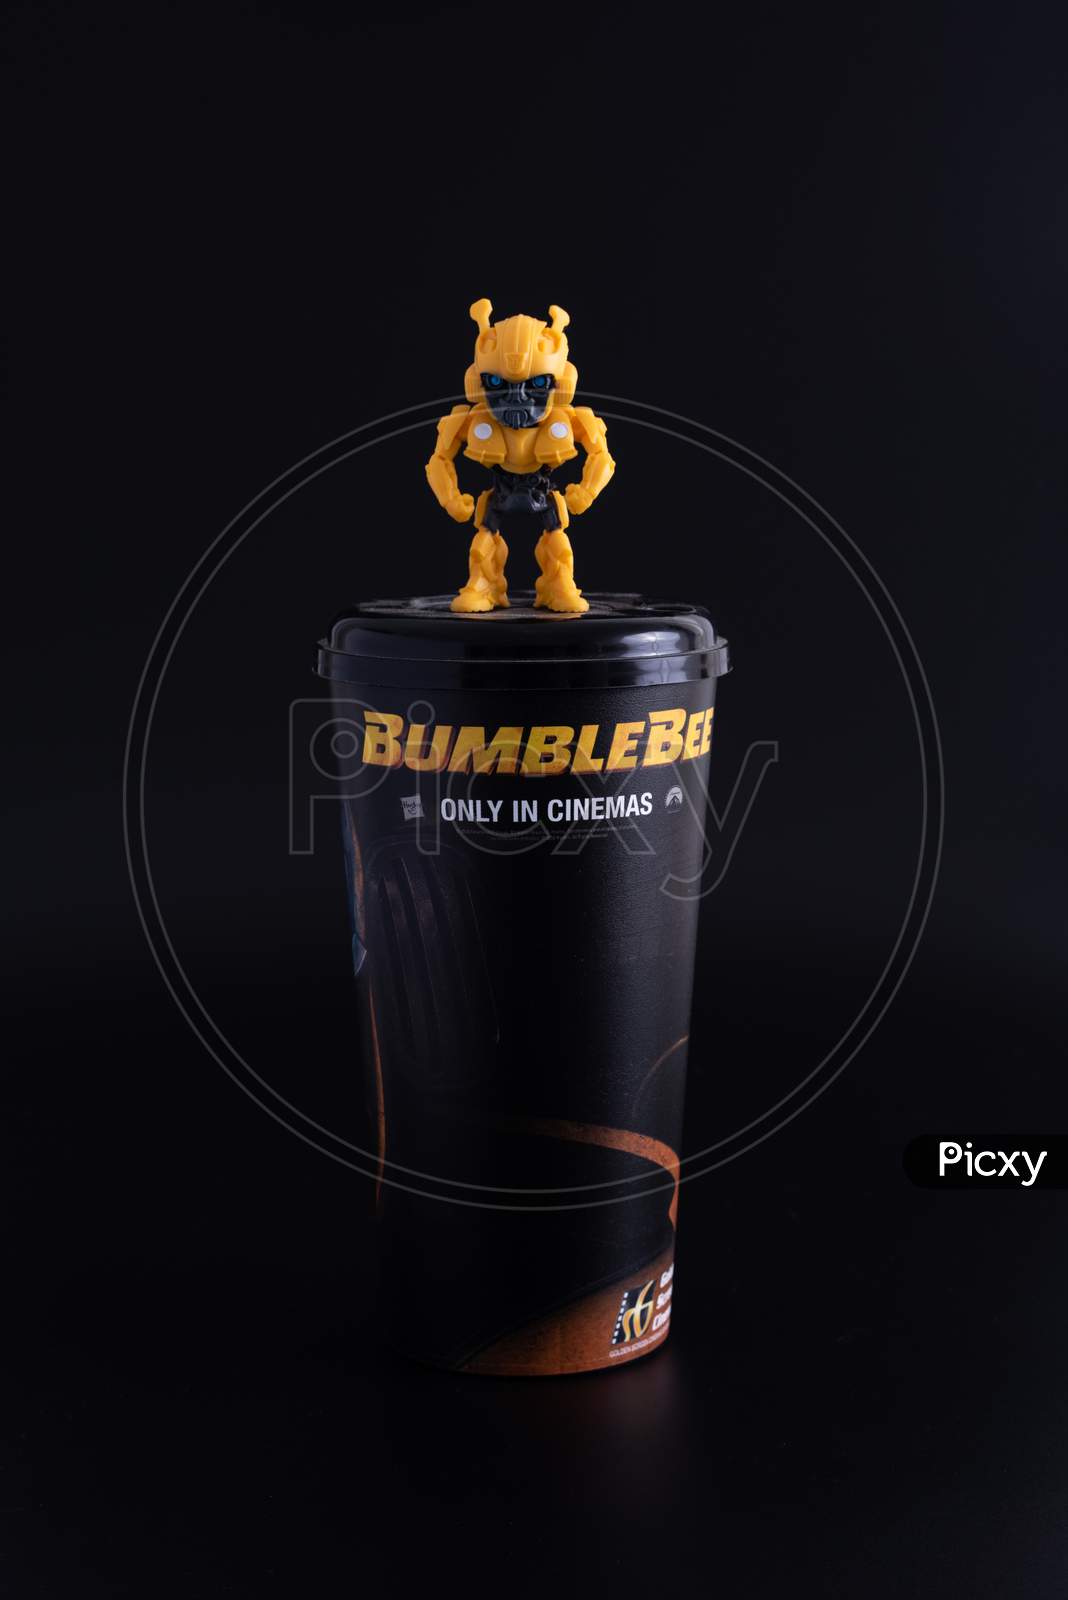 Kuala Lumpur/Malaysia - May 19 2019: Toy Transformers Cup/Tumbler From The Cinema Promotion On The Black Background